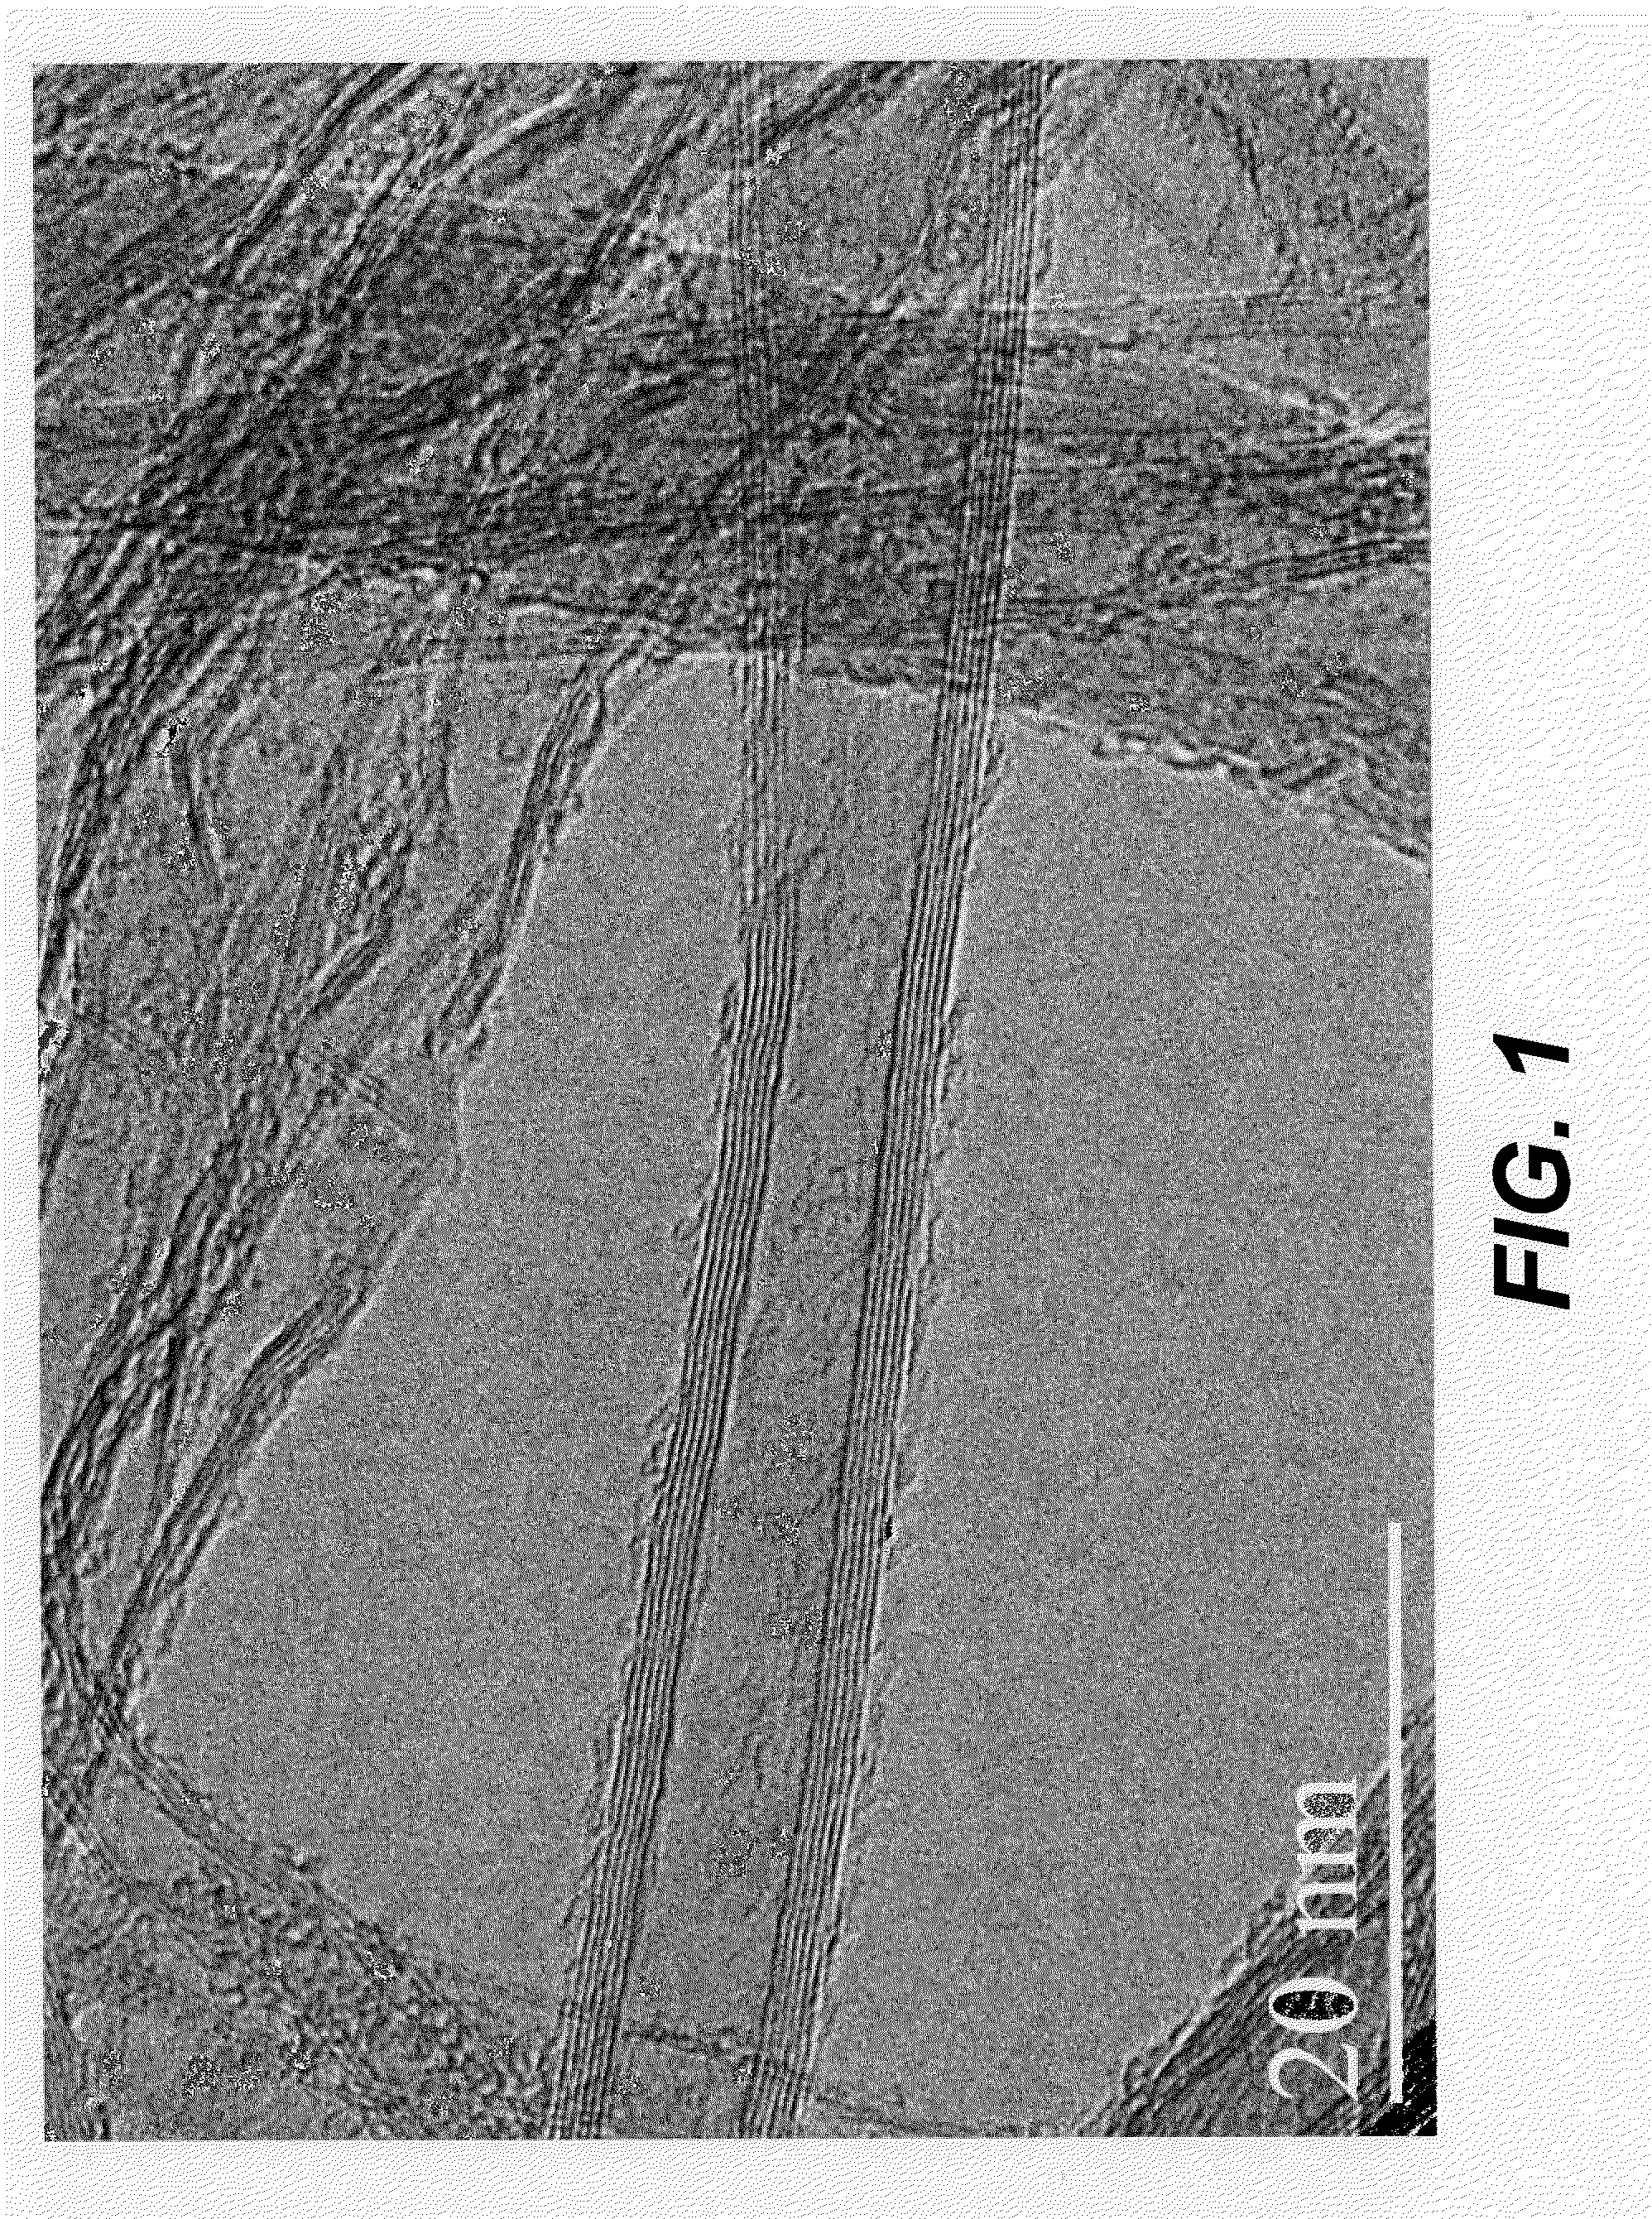 Cnt-tailored composite sea-based structures